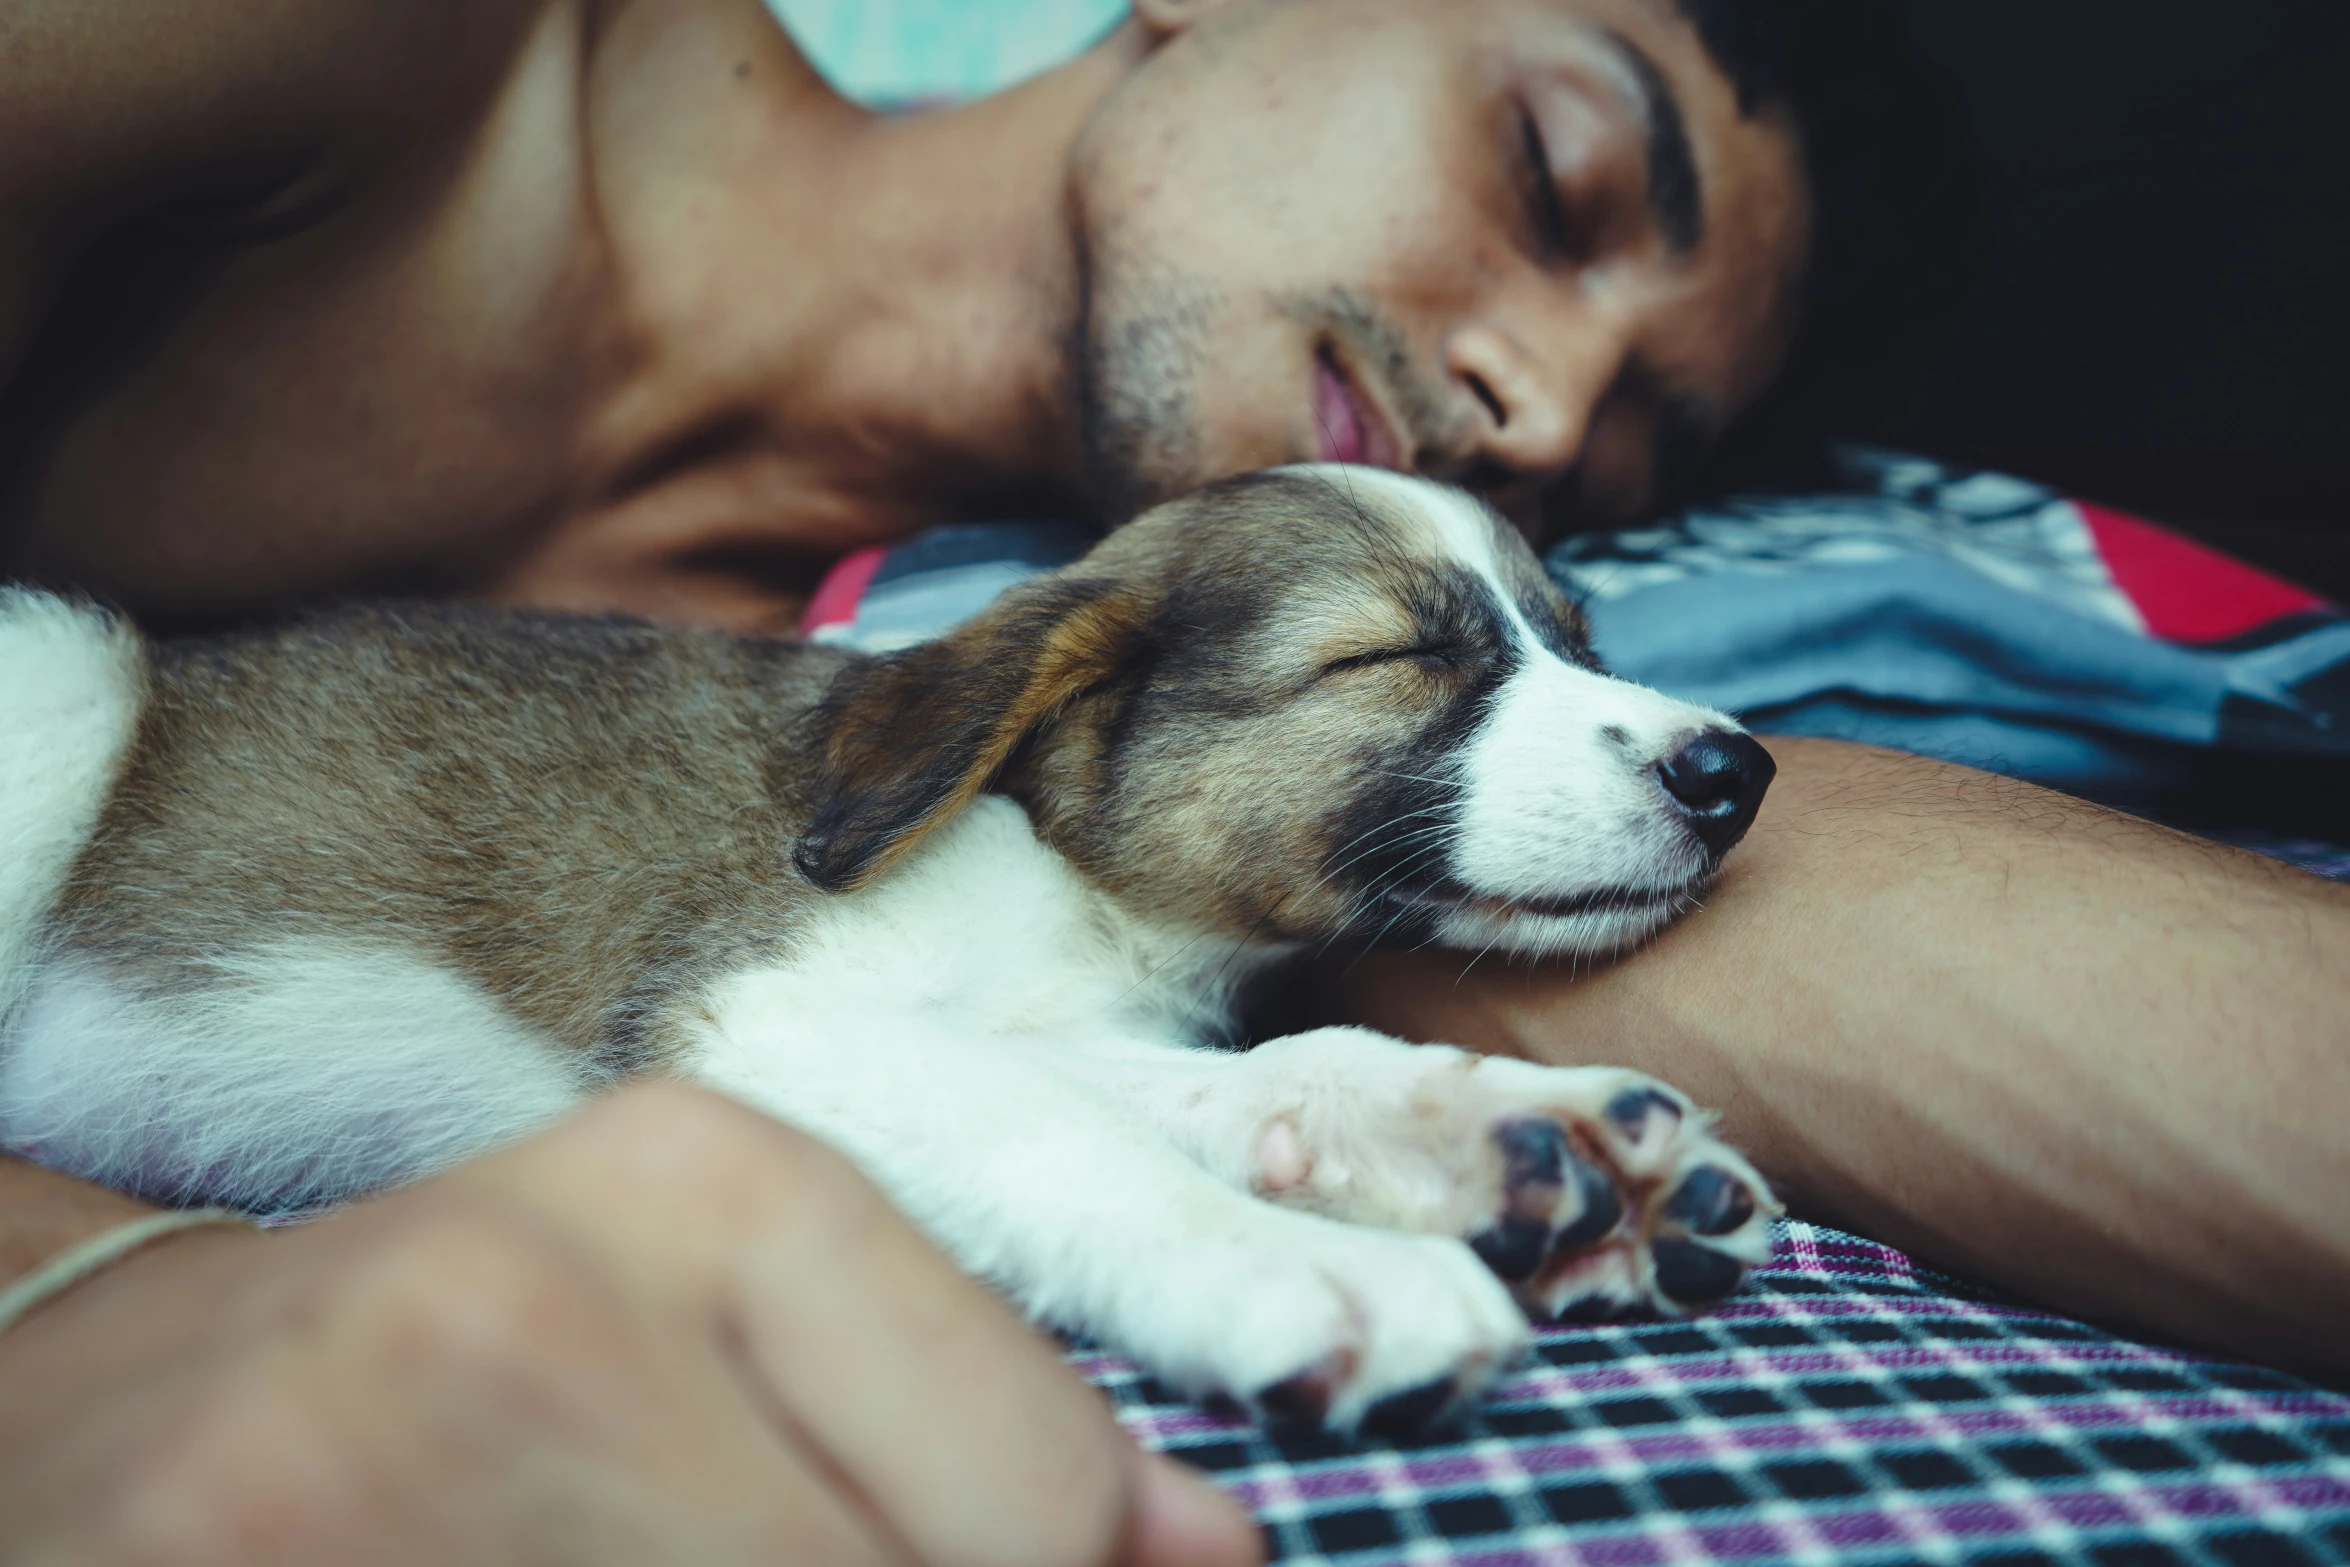 man asleep with dog while on bed